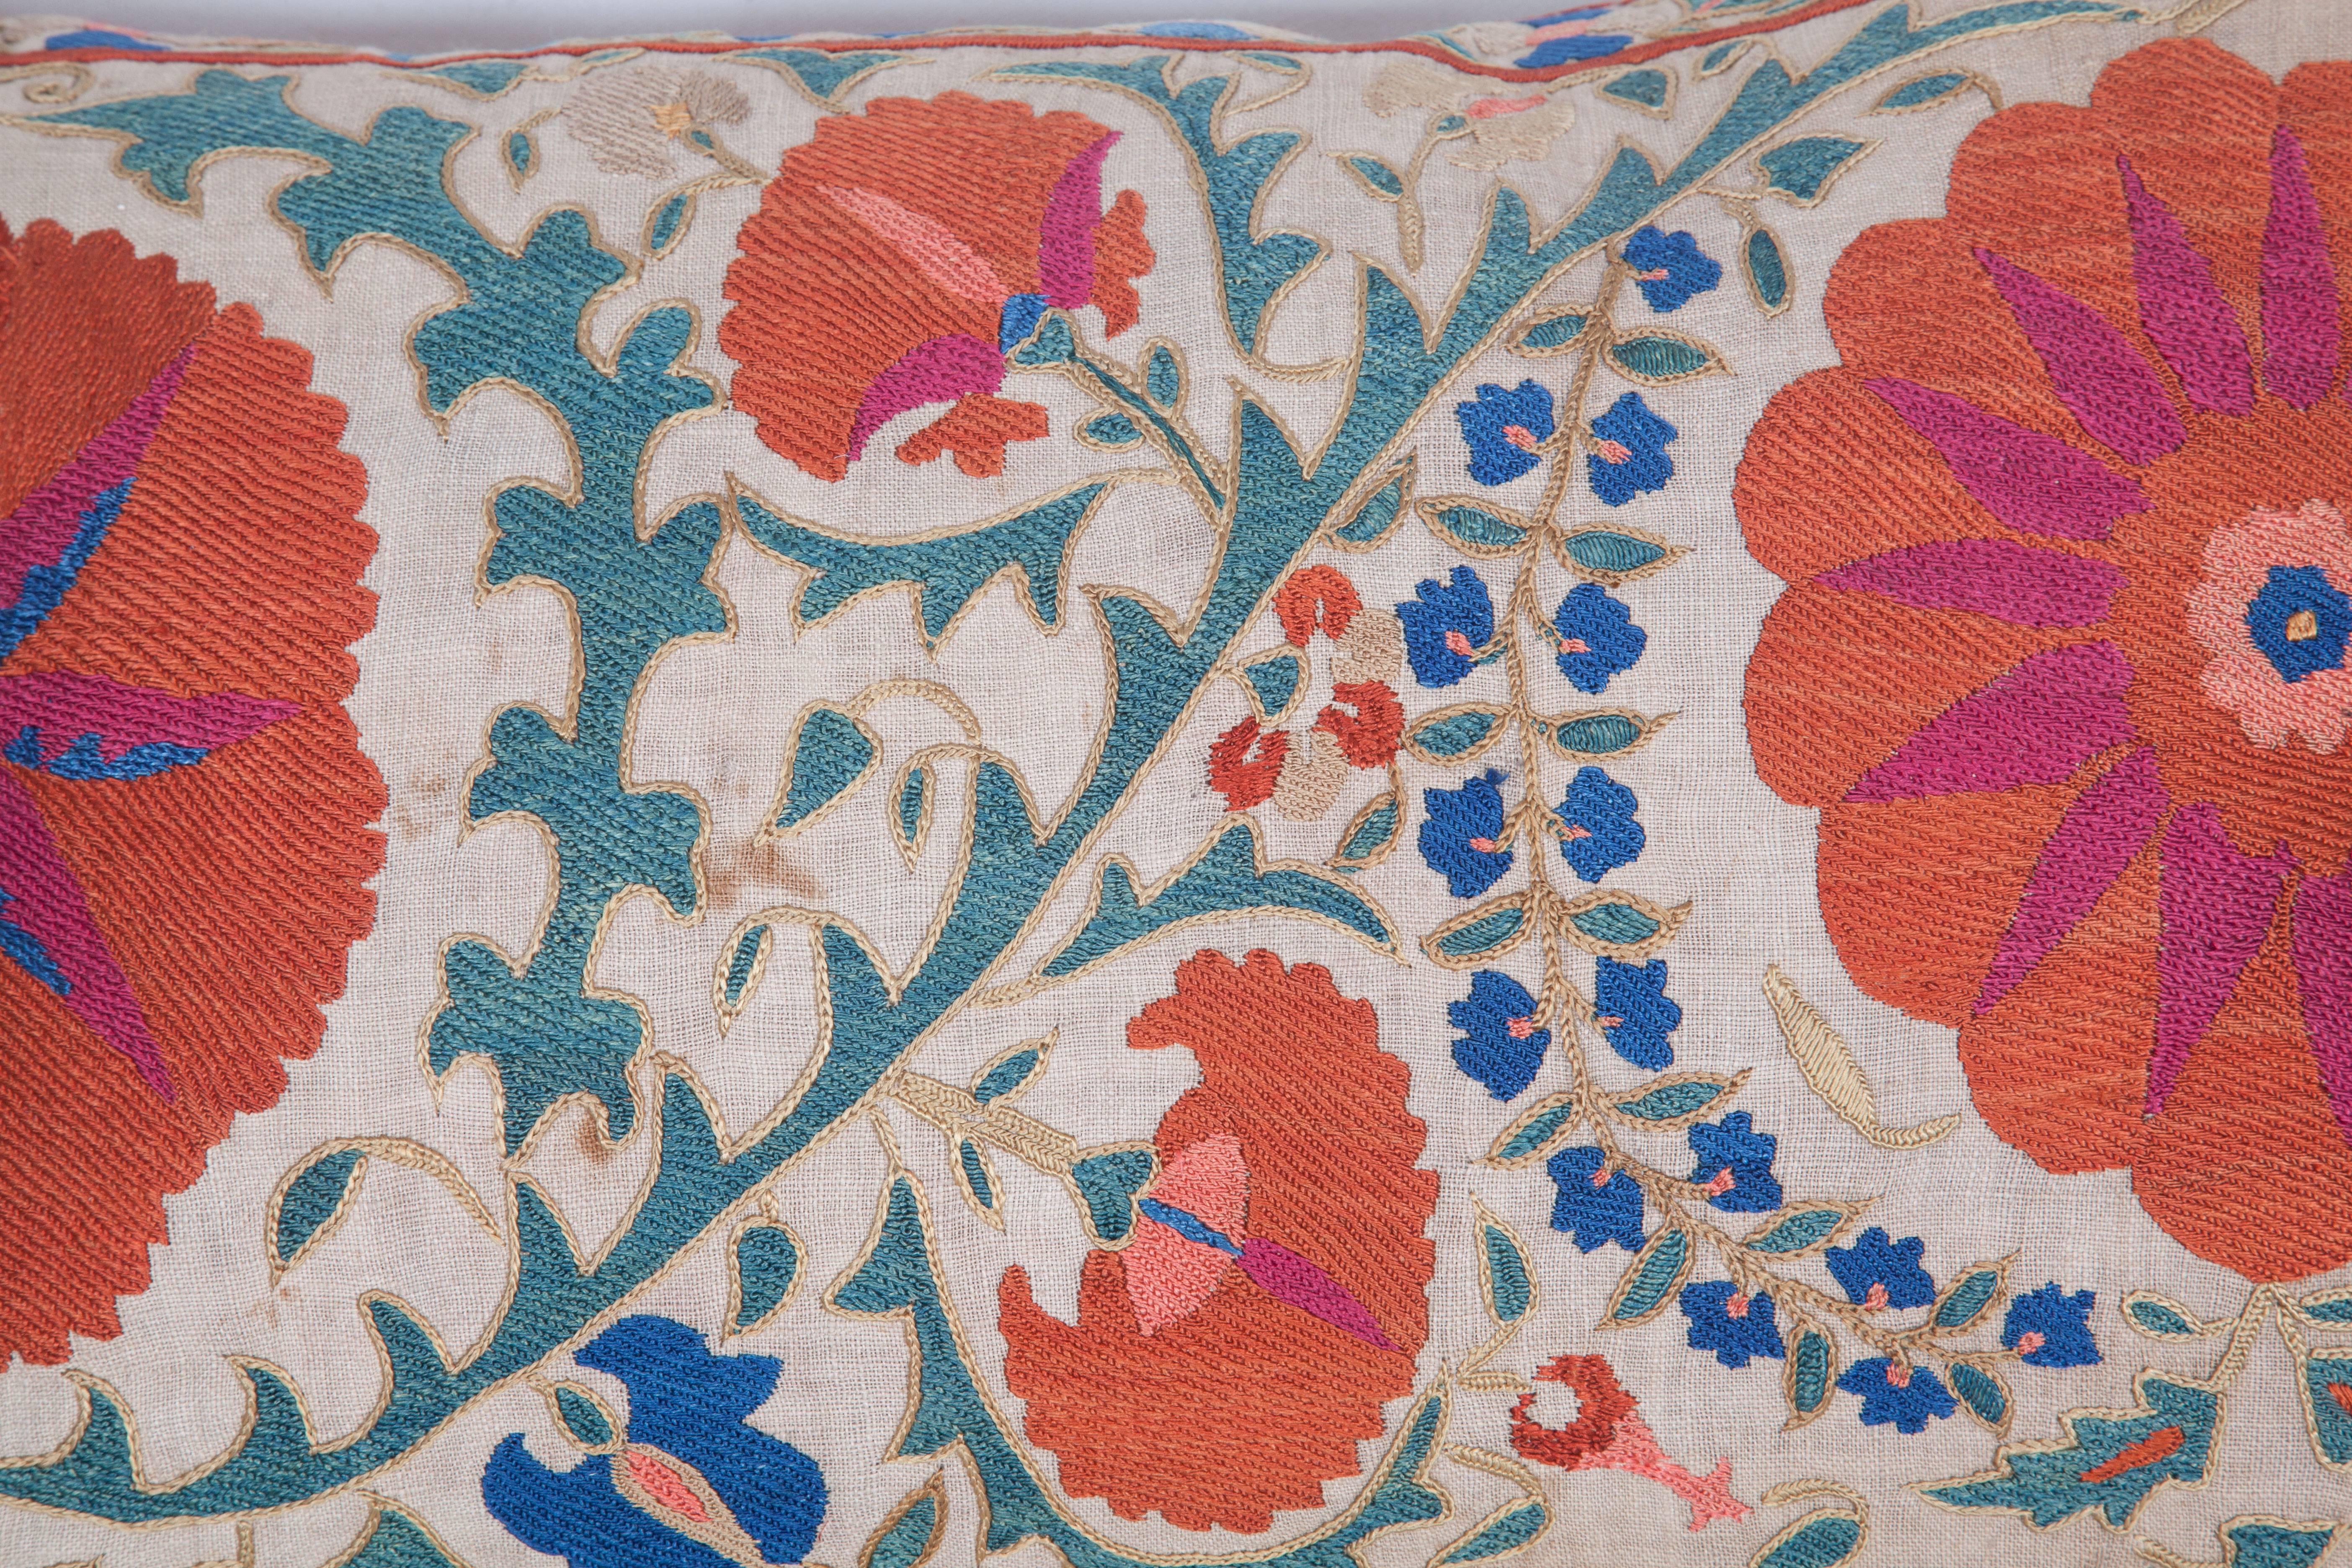 Embroidered Antique Pillow Made Out of a Mid-19th Century, Uzbek Bukhara Suzani